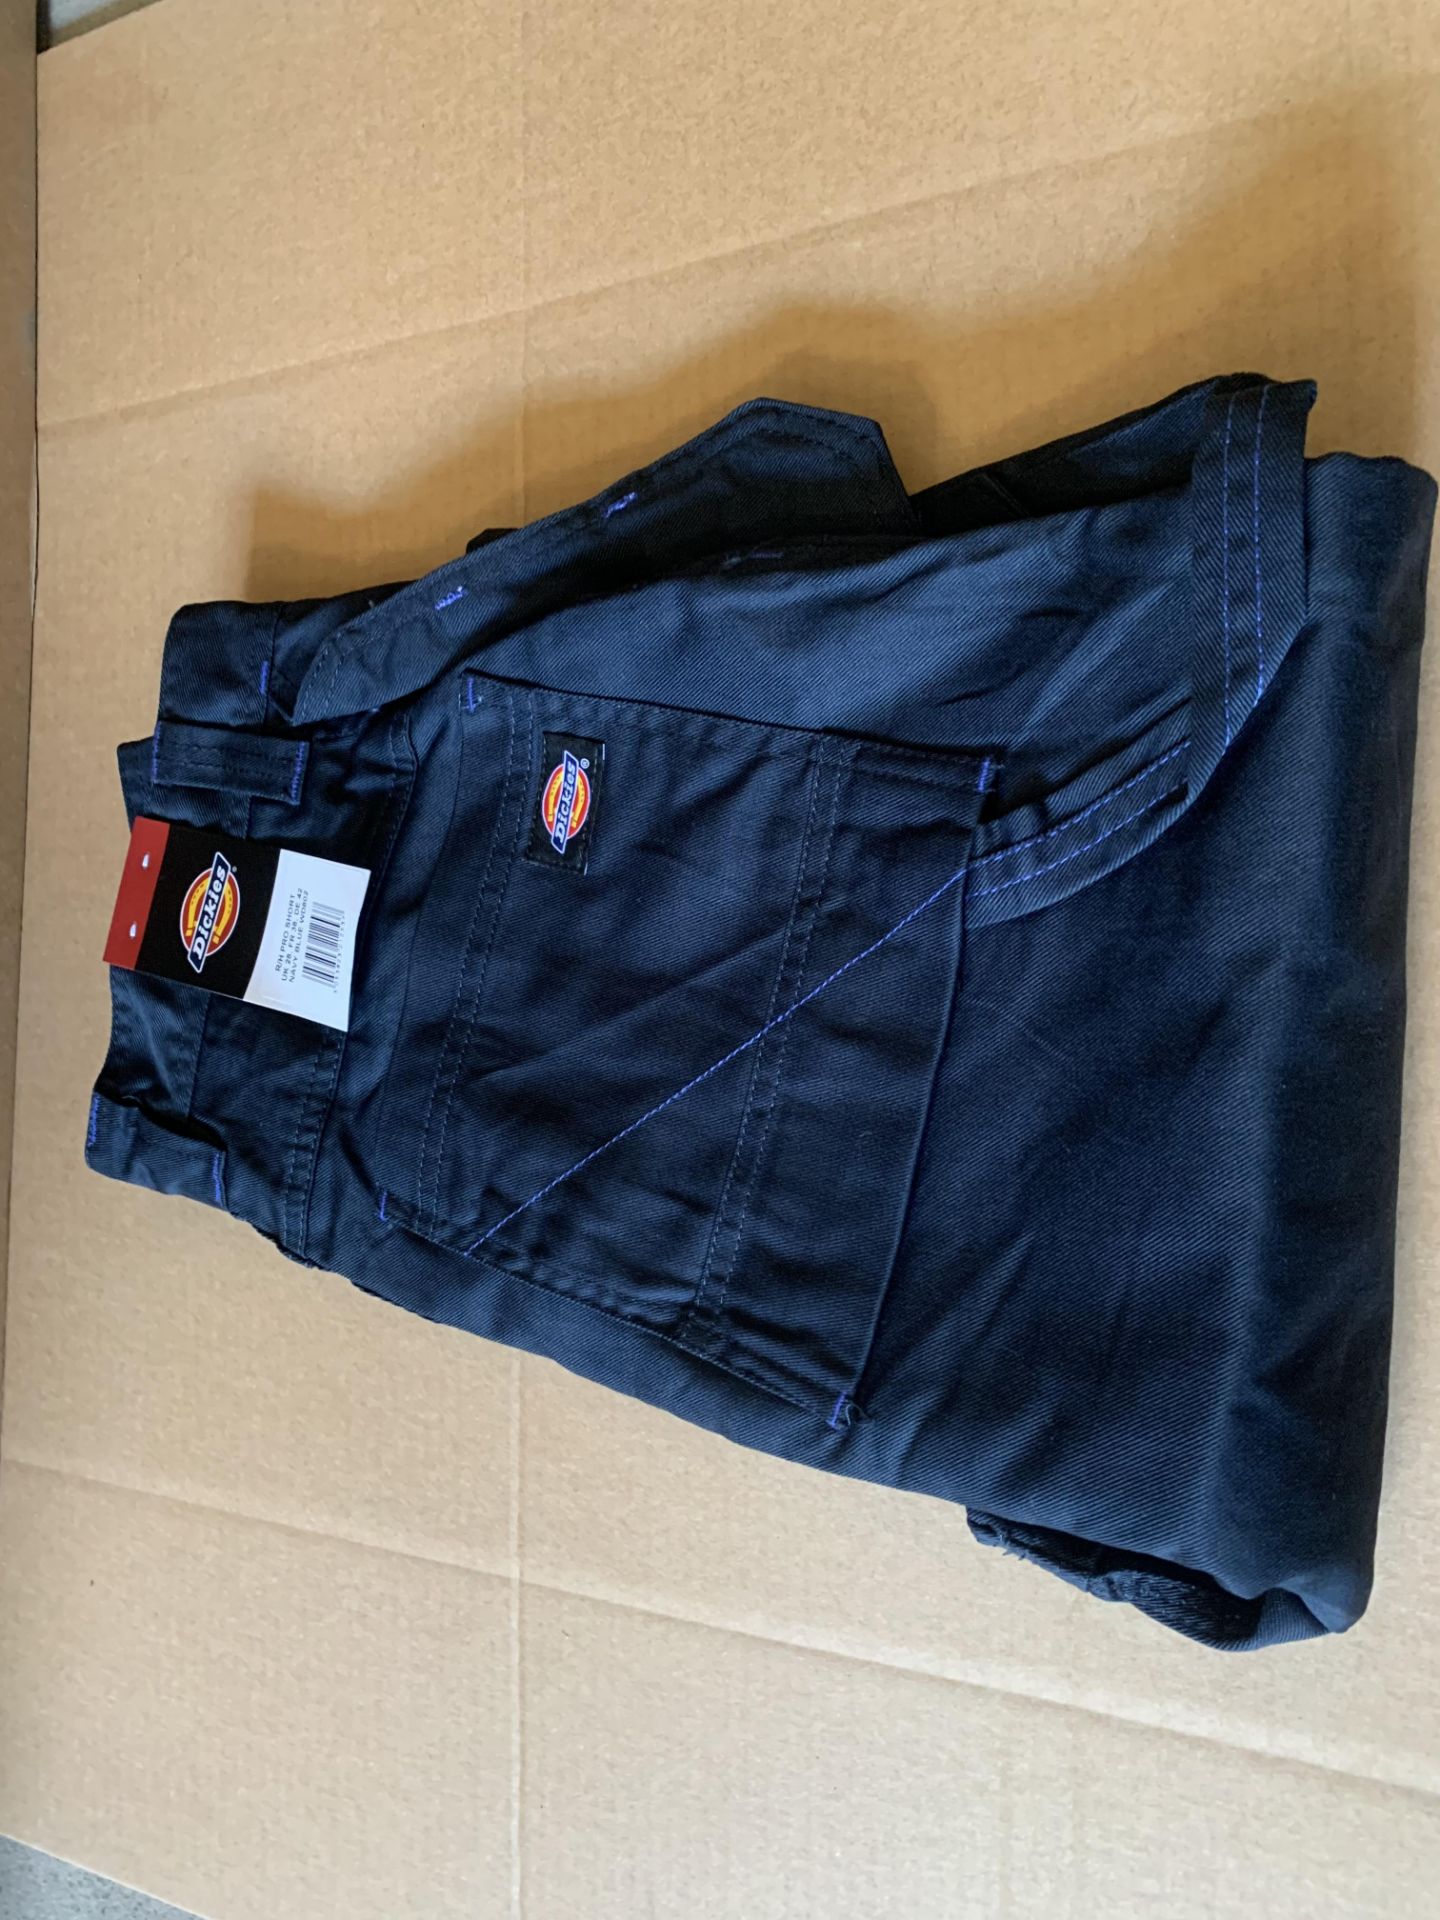 8 X BRAND NEW DICKIES PRO SHORTS NAVY BLUE SIZE 28